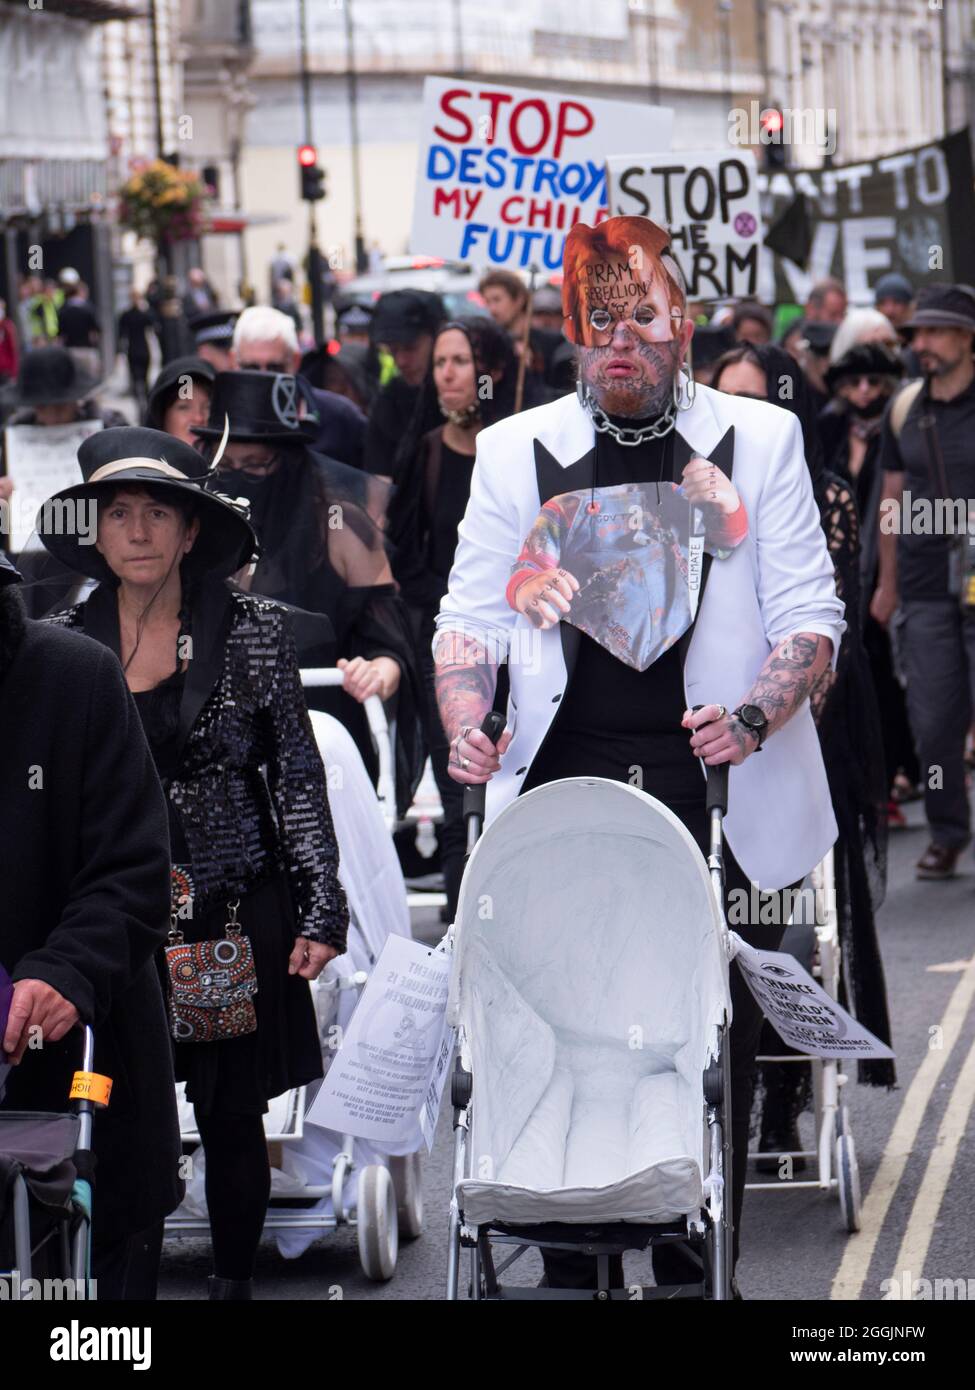 Extinction Rebellion activists London 31 August 2021. Pram rebellion action protesters in Central London, walk with ghostly white prams dressed in funeral attire Stock Photo